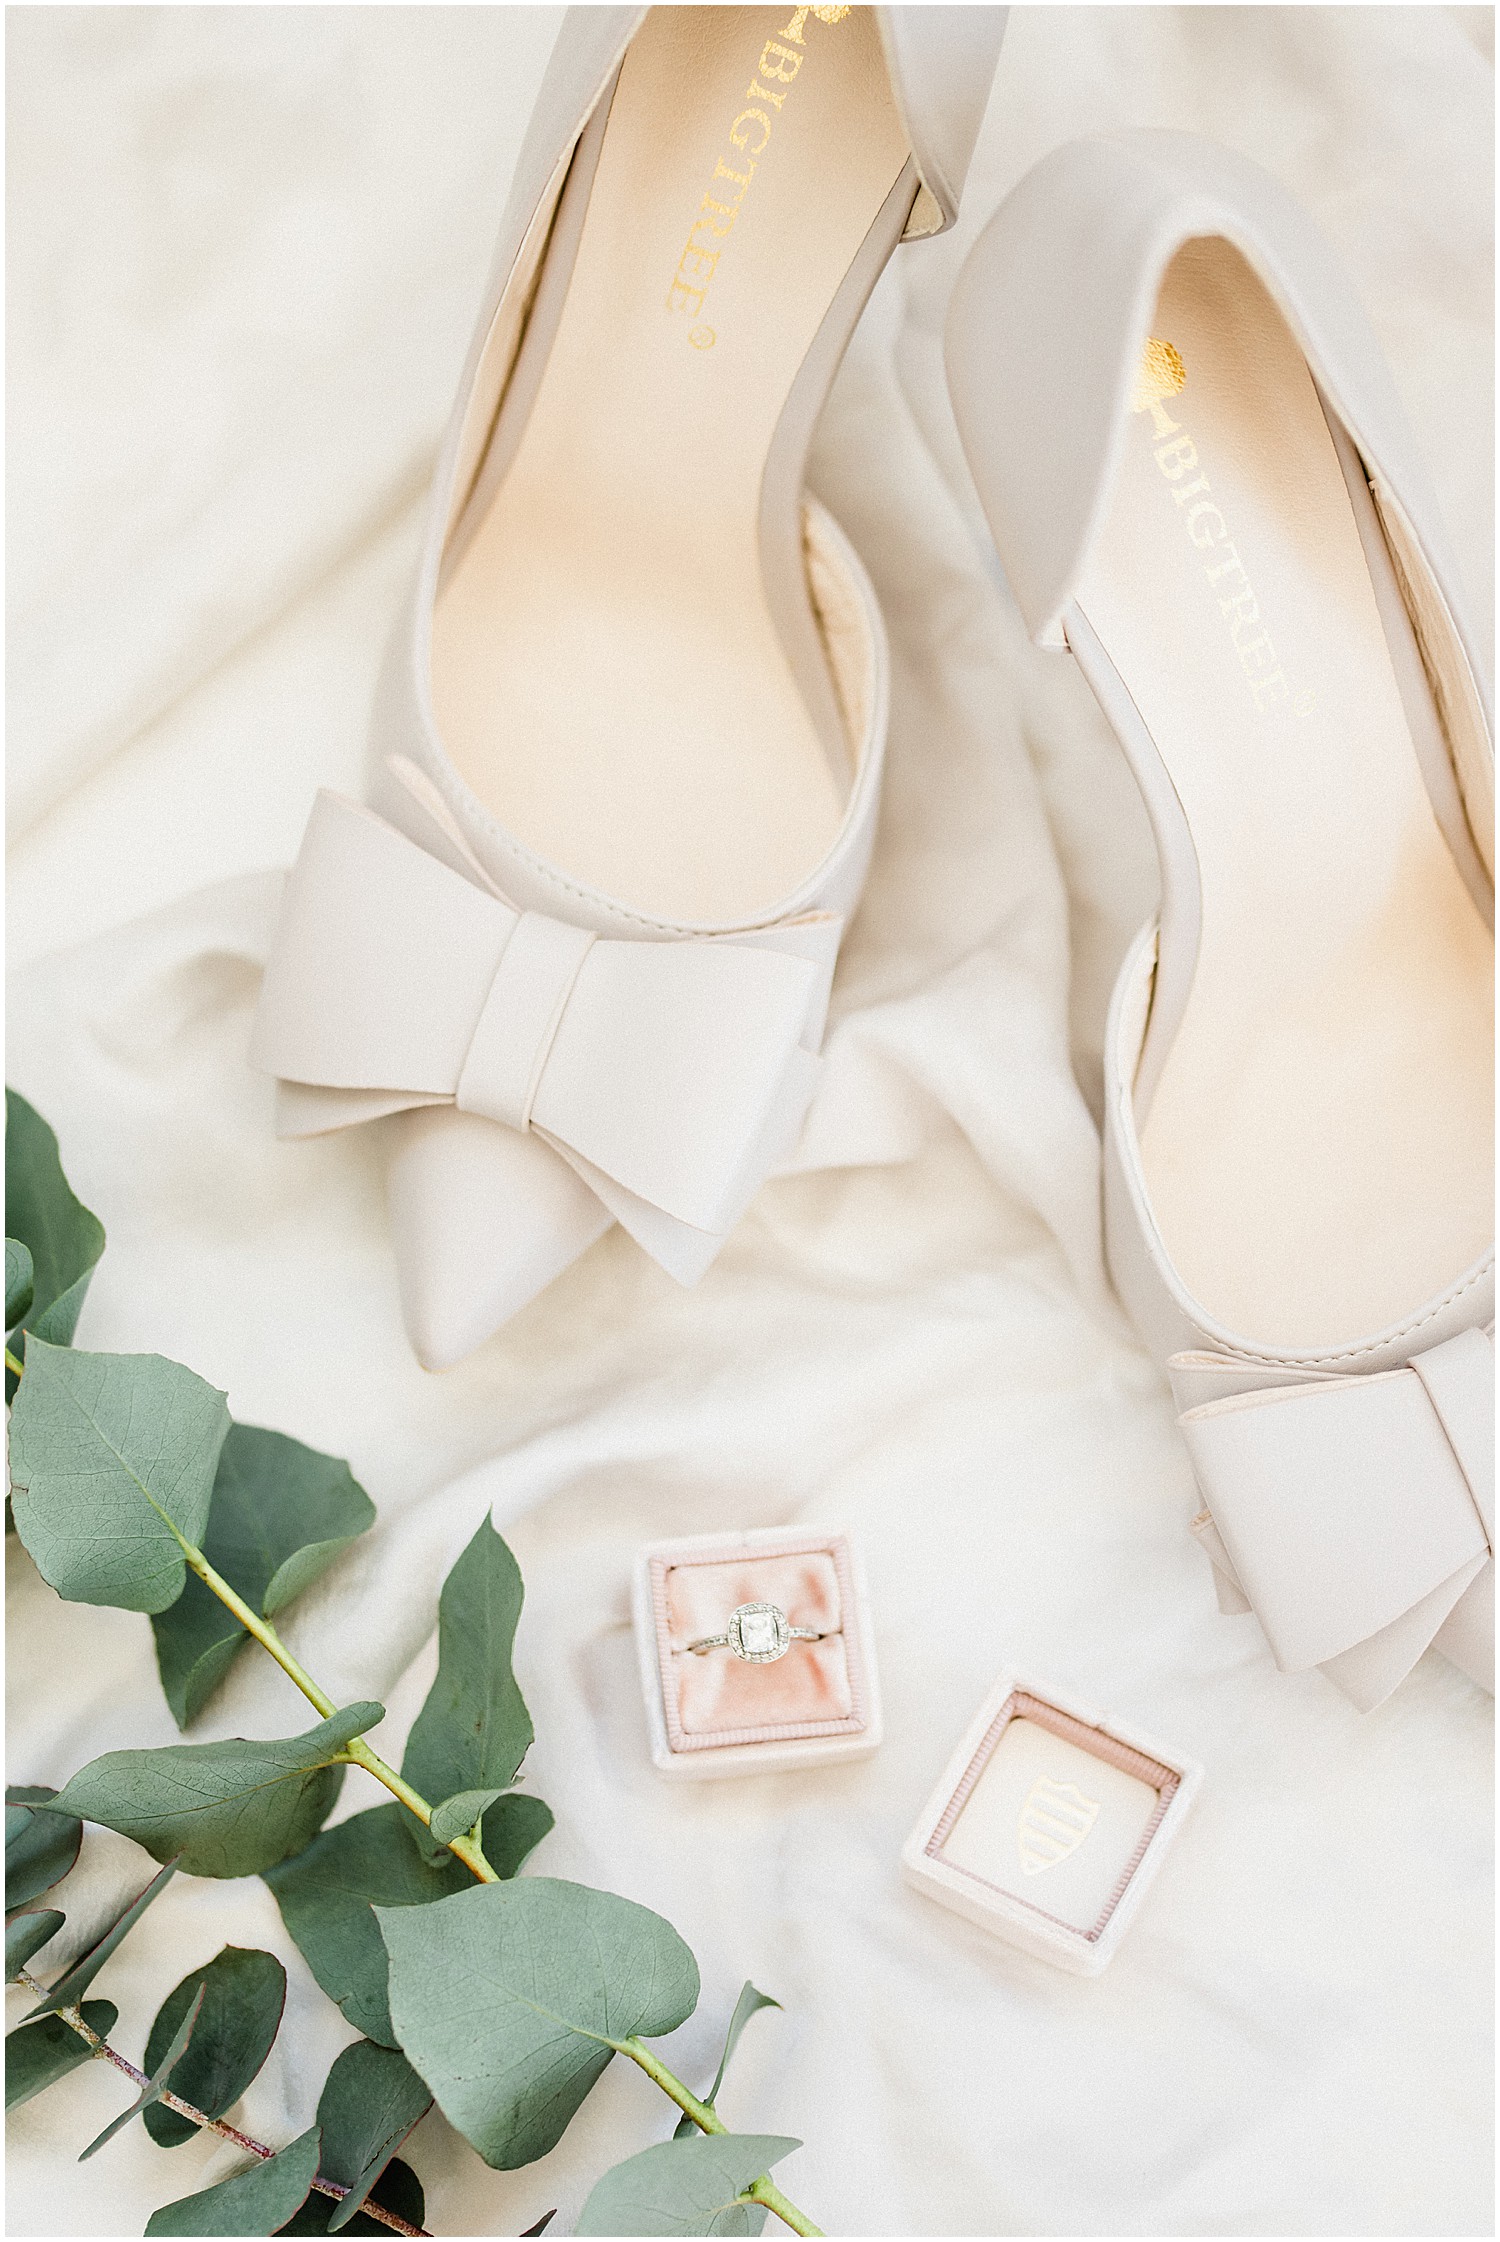 ivory wedding heels featuring bows on an ivory silk background